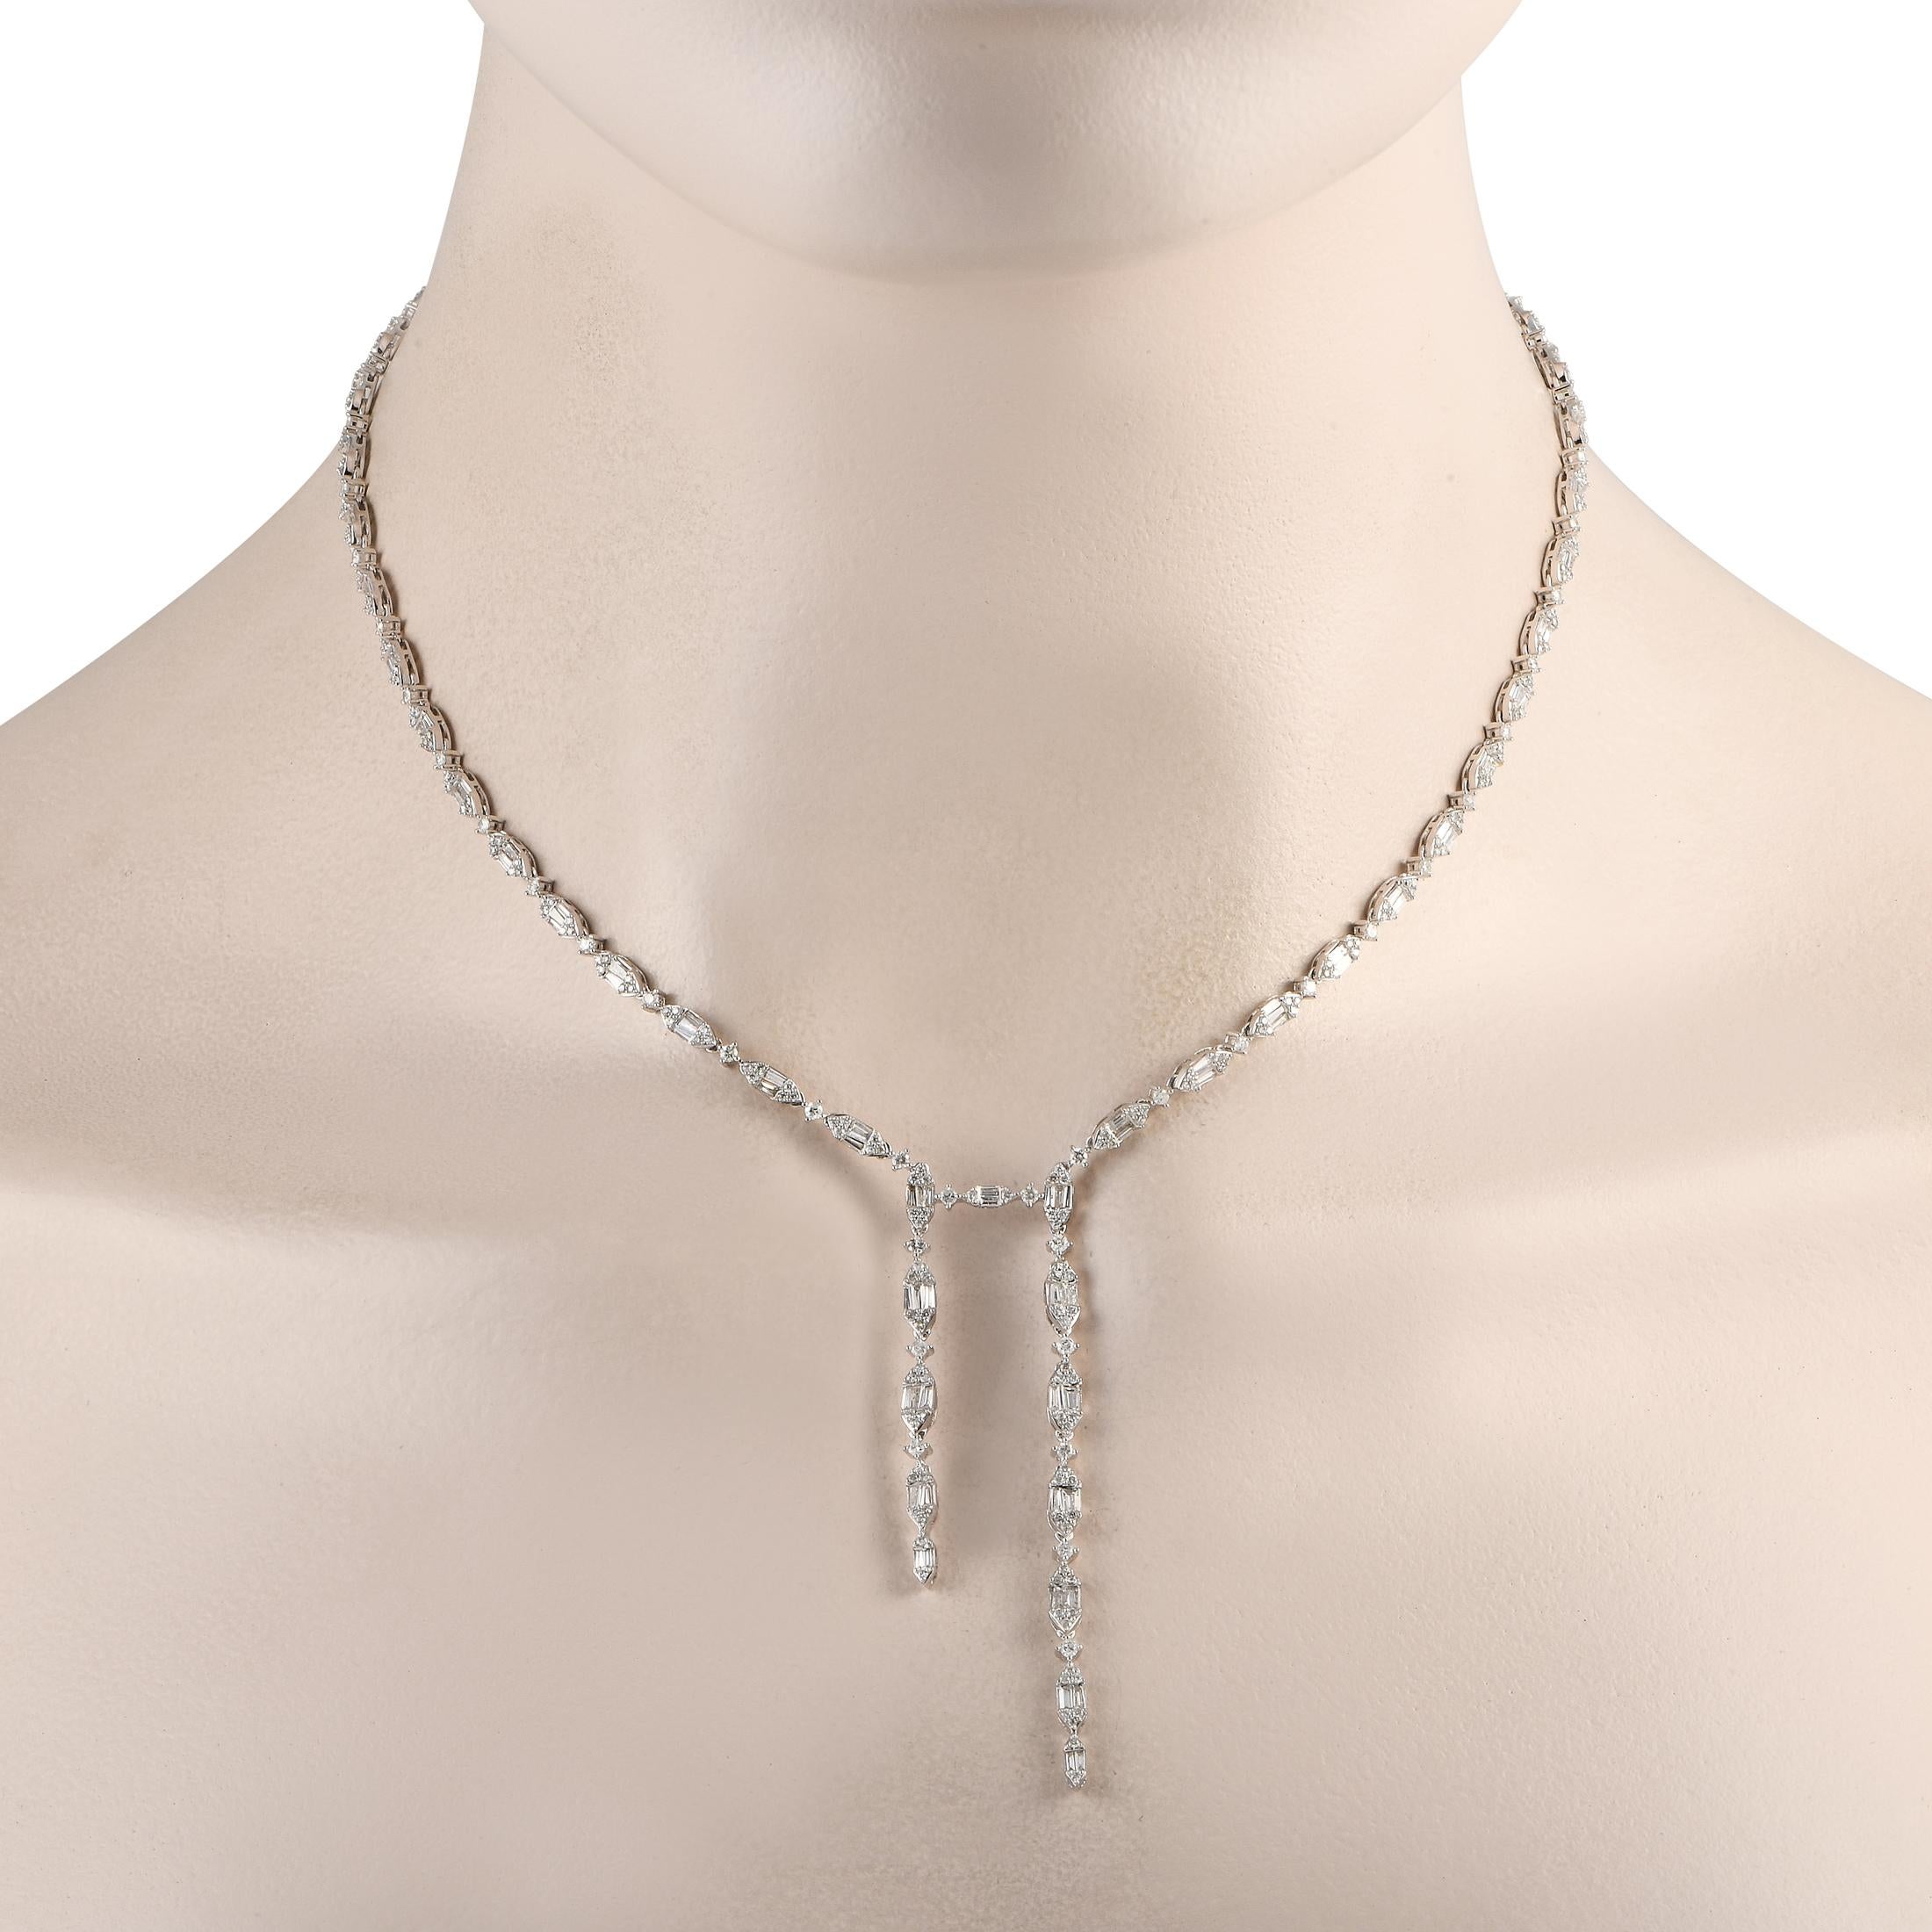 Sparkling Diamonds with a total weight of 4.80 carats allow this sleek, sophisticated necklace to effortlessly catch the light. Crafted from 14K White Gold, it measures 16.0 long and includes two dangling pendants measuring 2.5 long.This jewelry